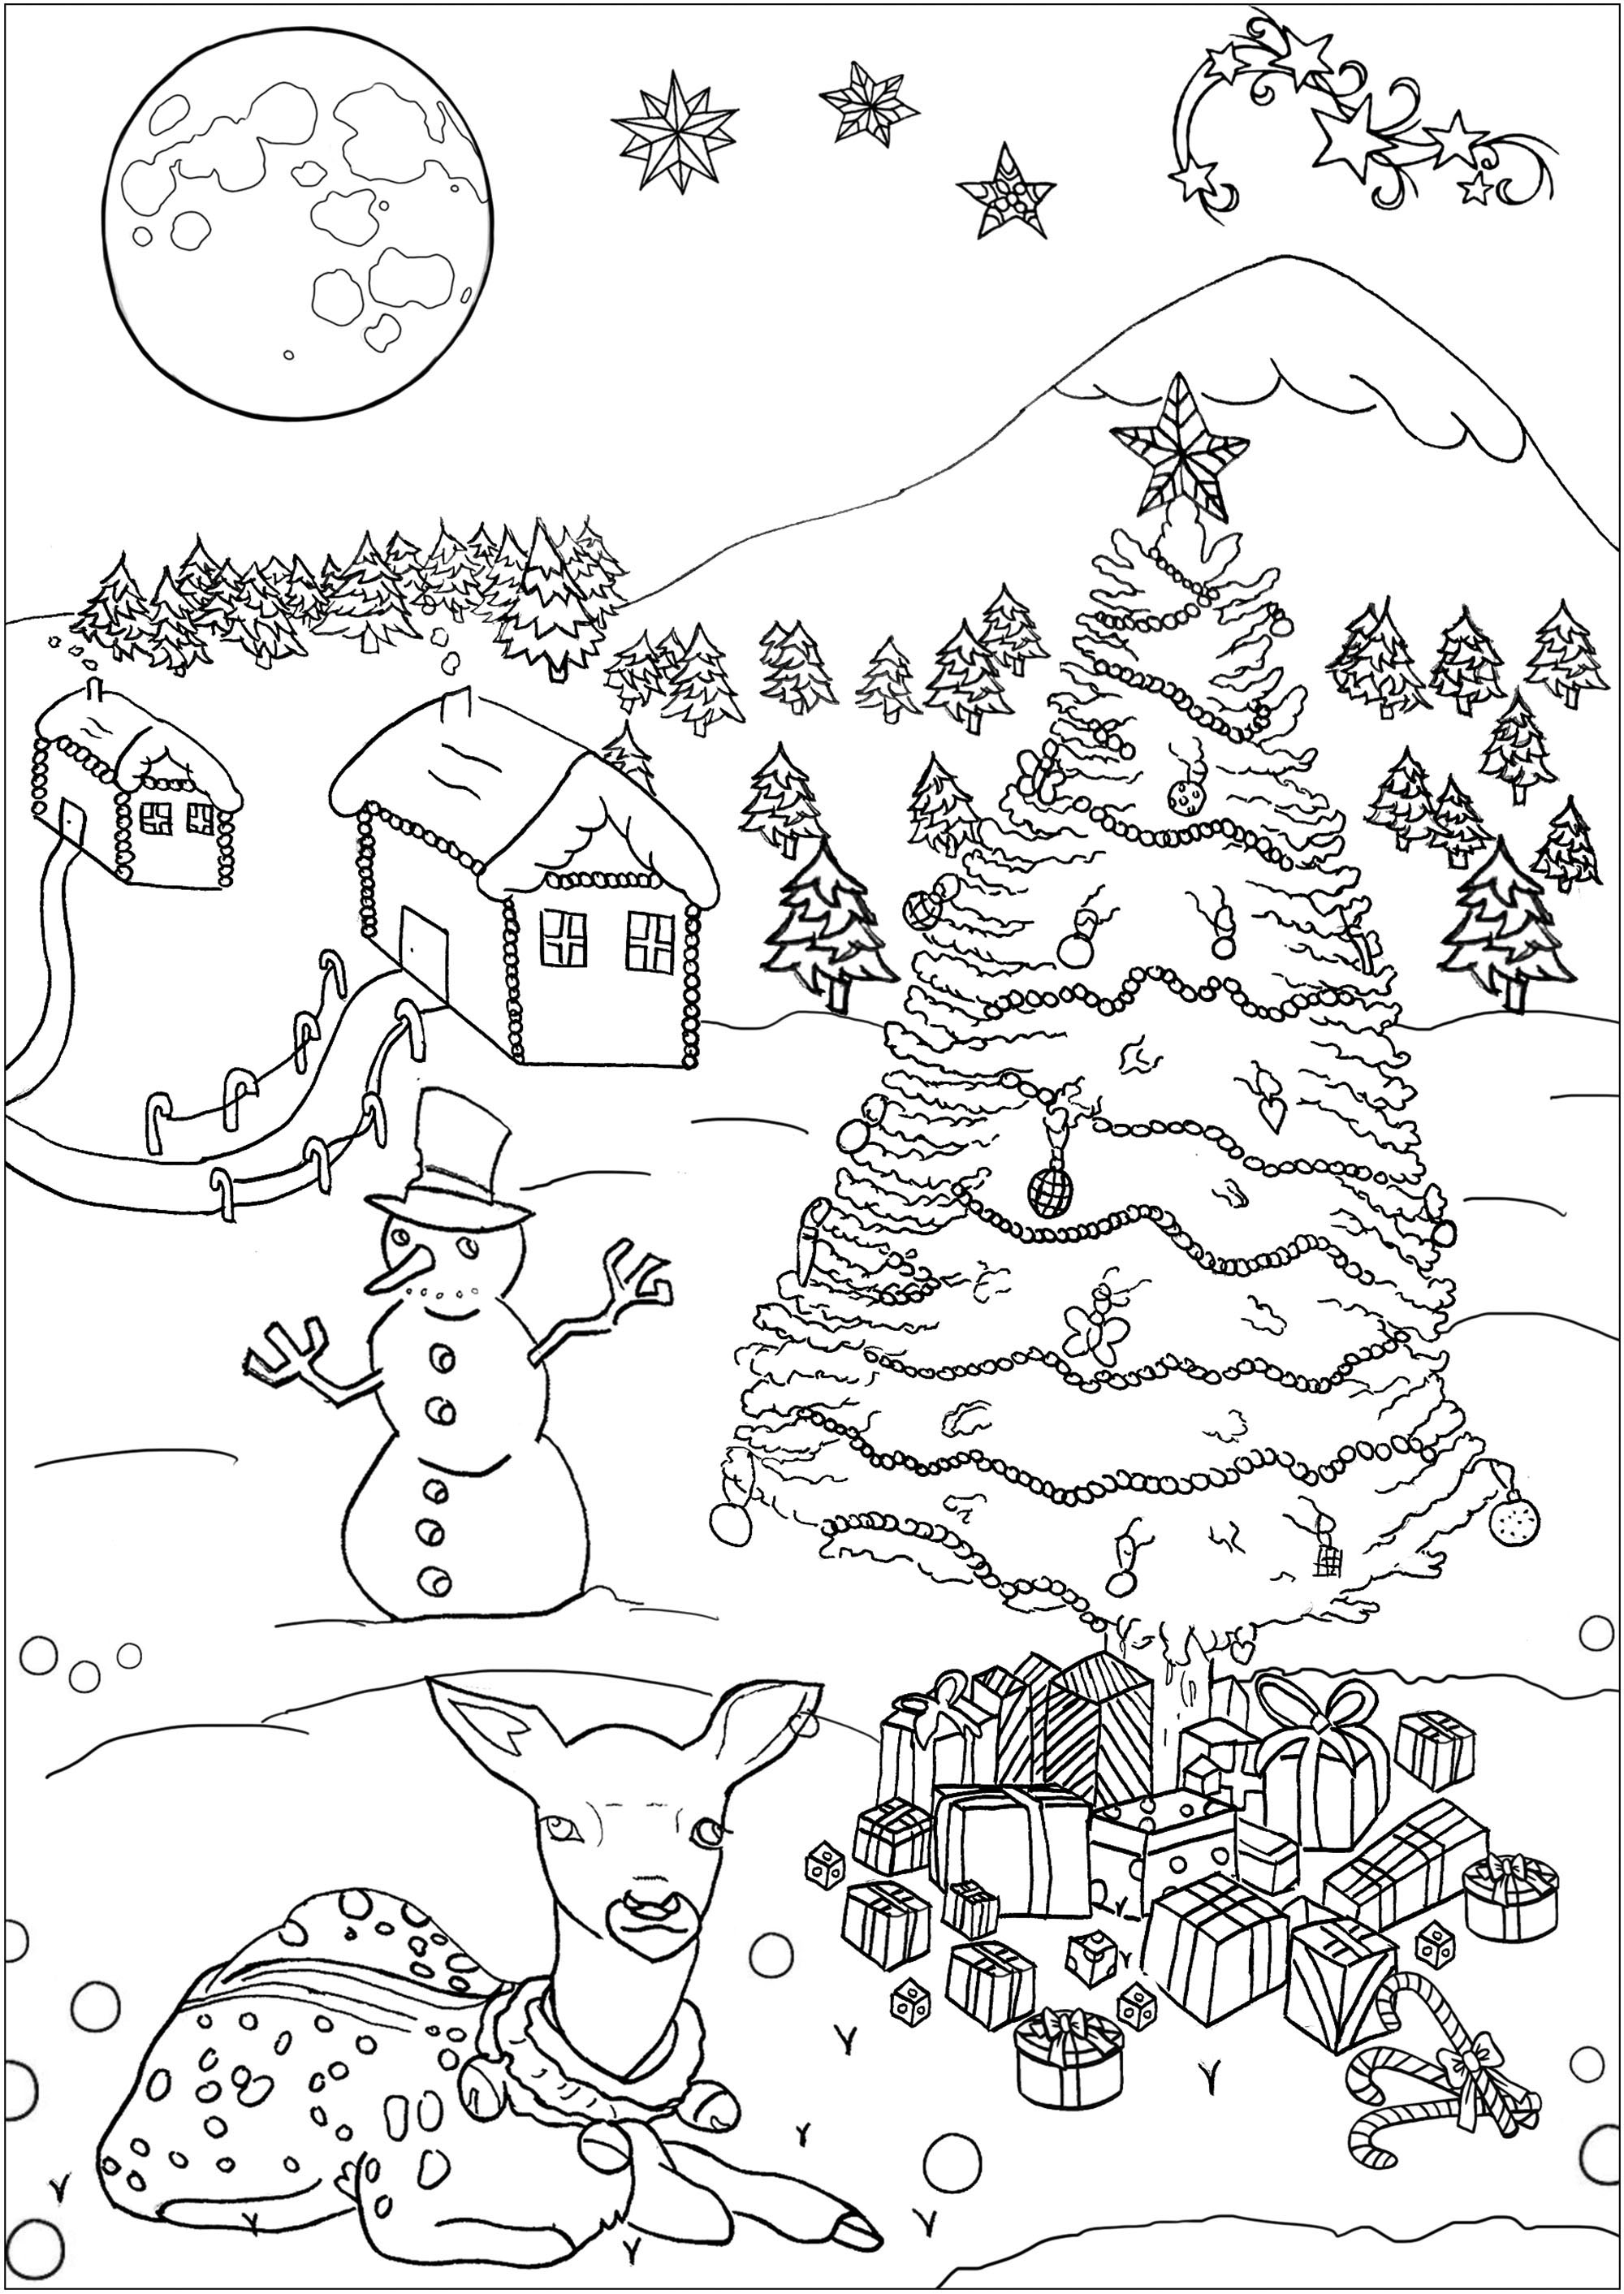 Pretty Christmas landscape - Christmas Kids Coloring Pages